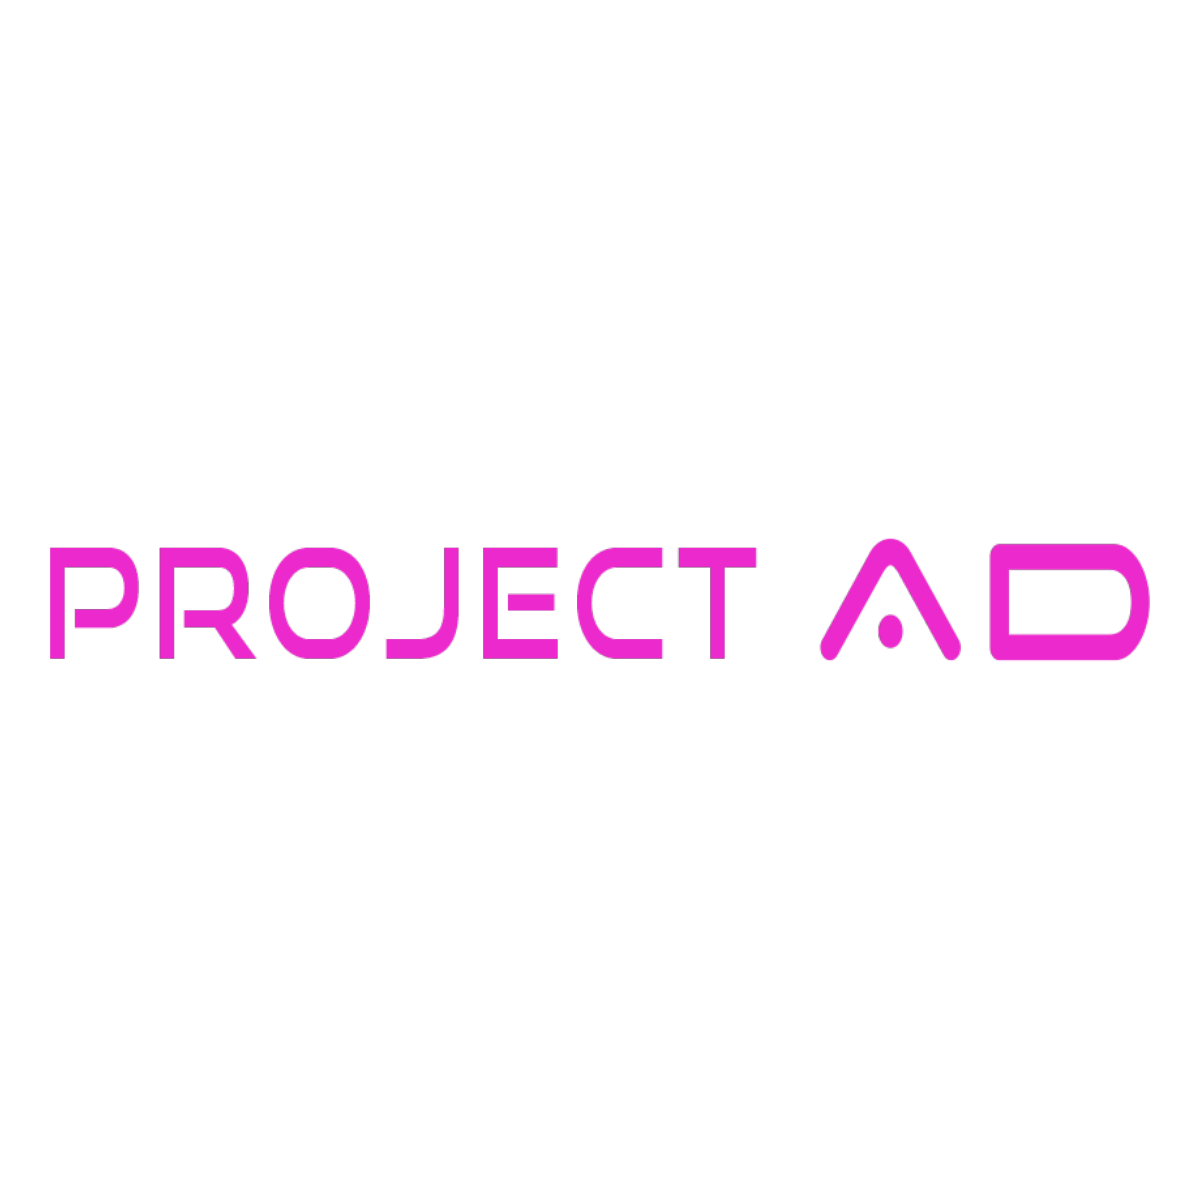 Project AD